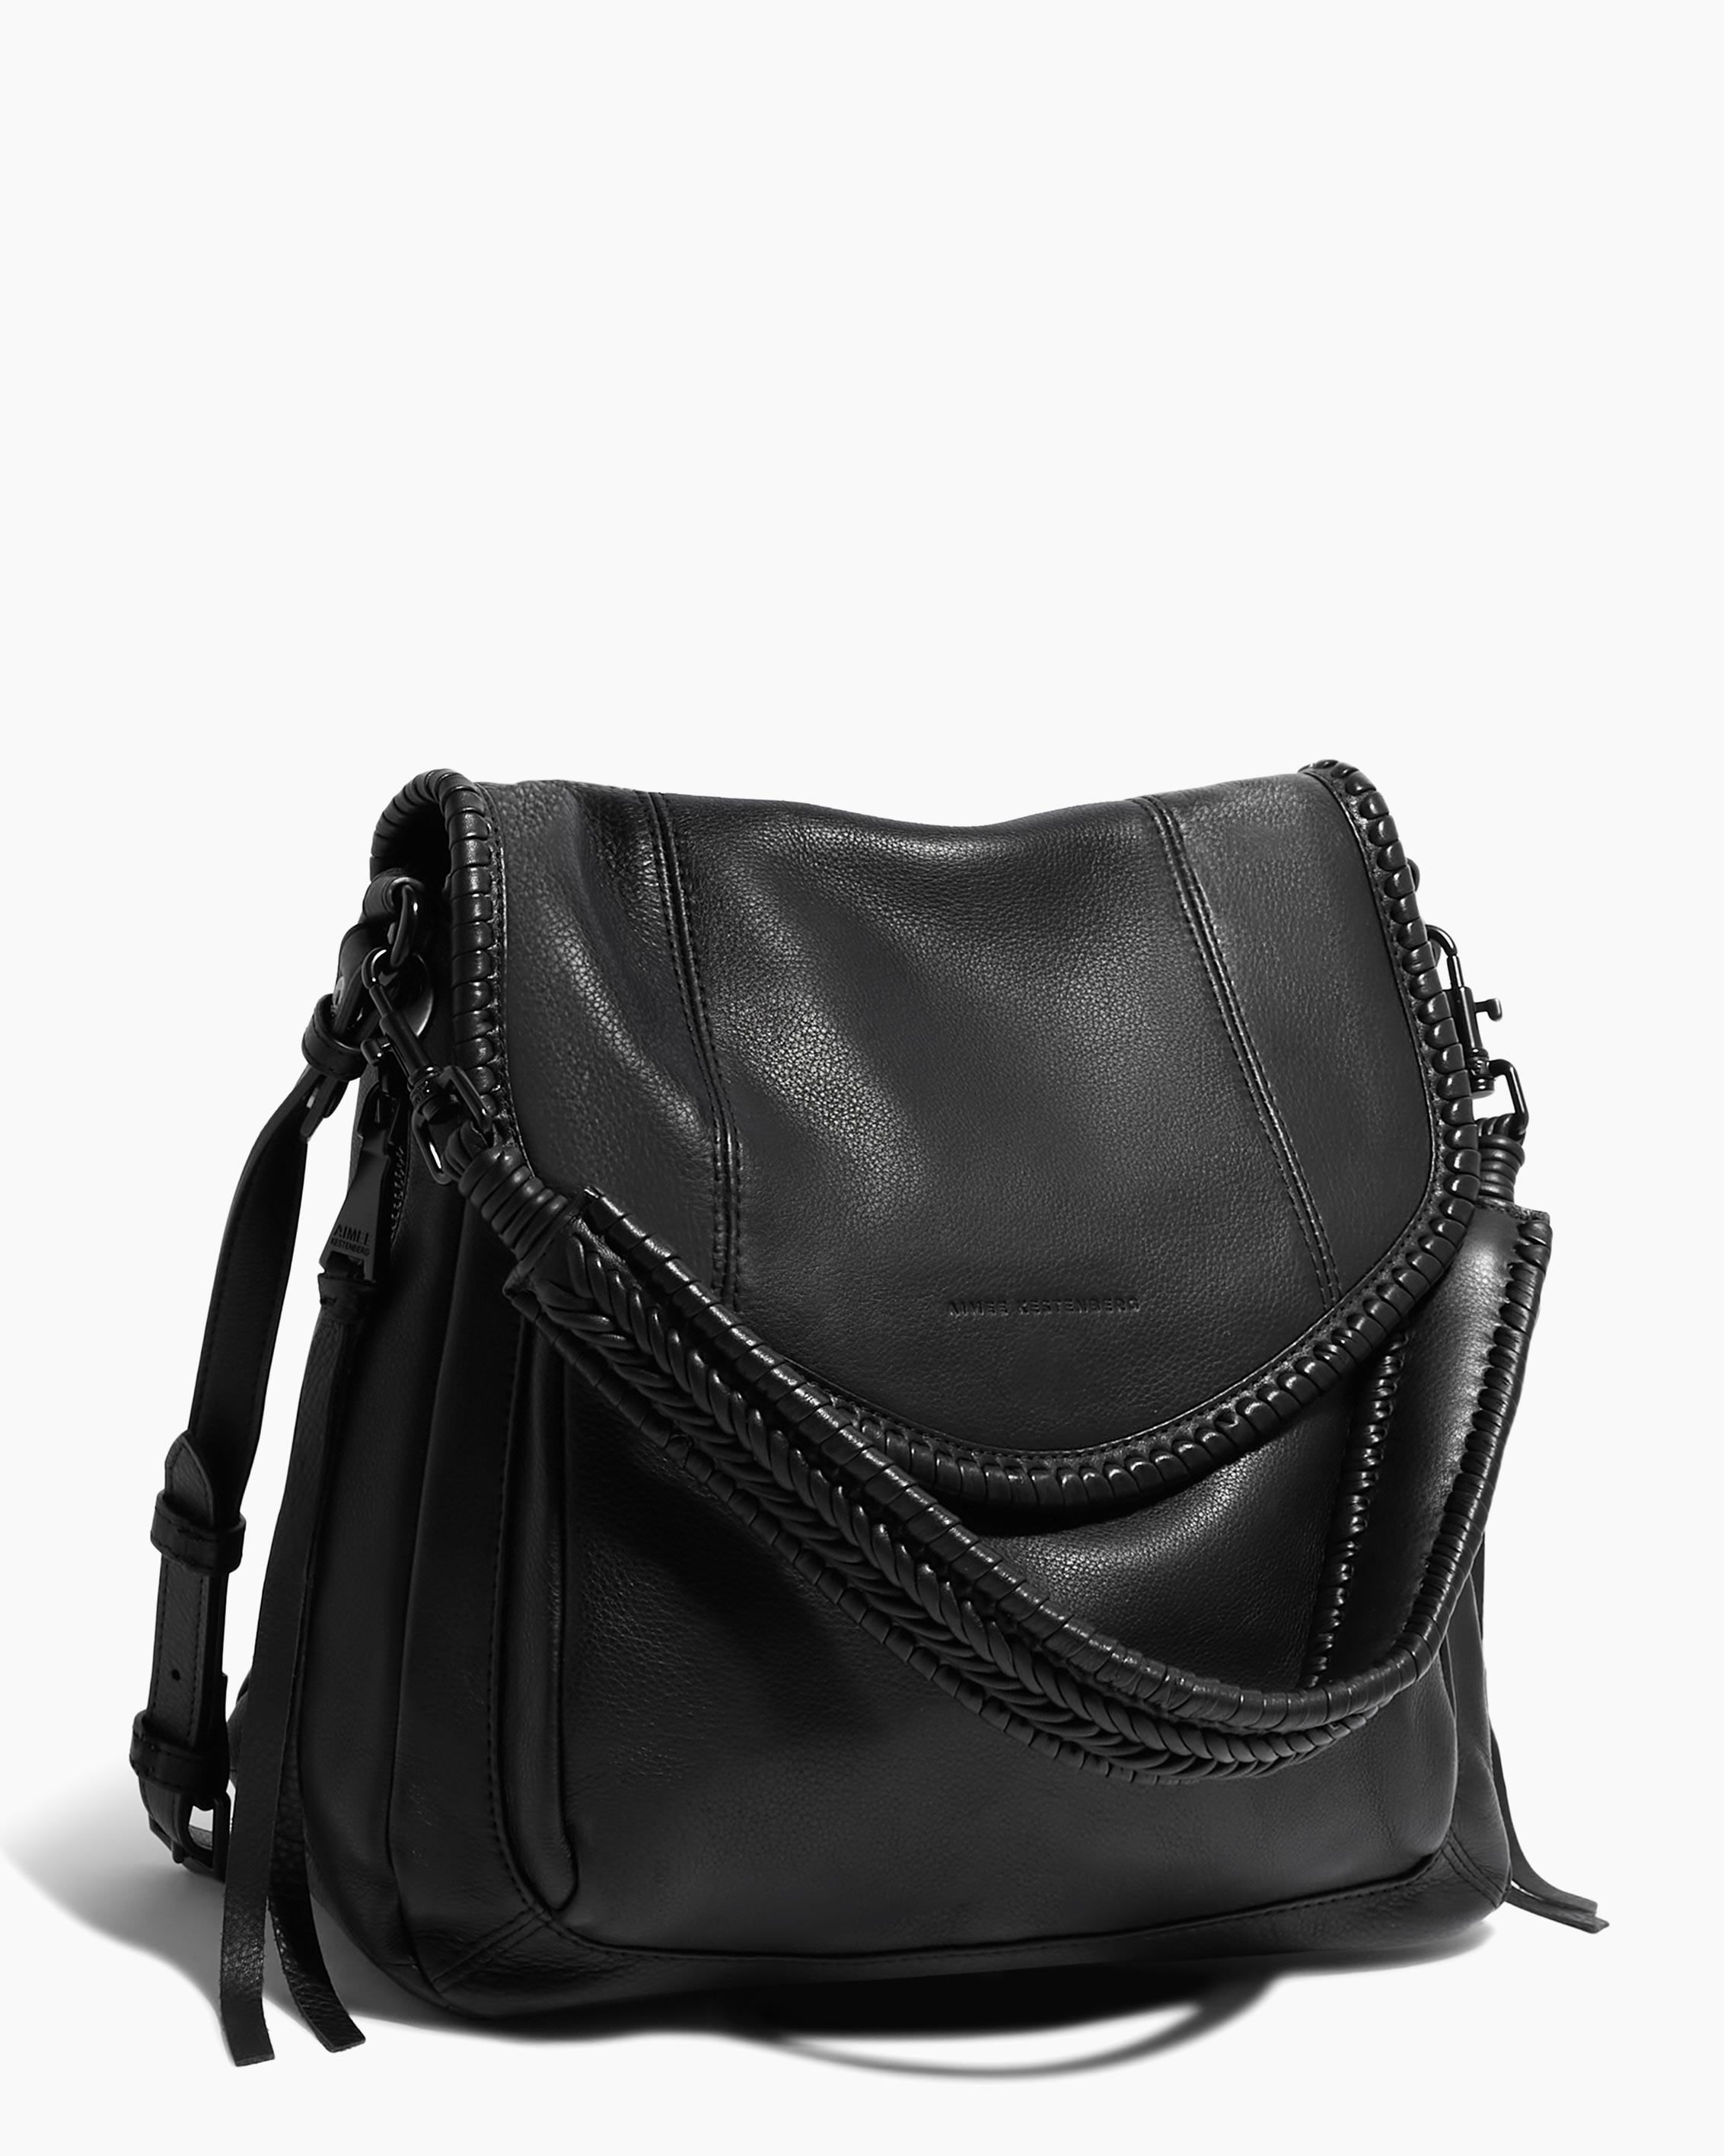 All For Love Convertible Shoulder Black With Black | Aimee Kestenberg